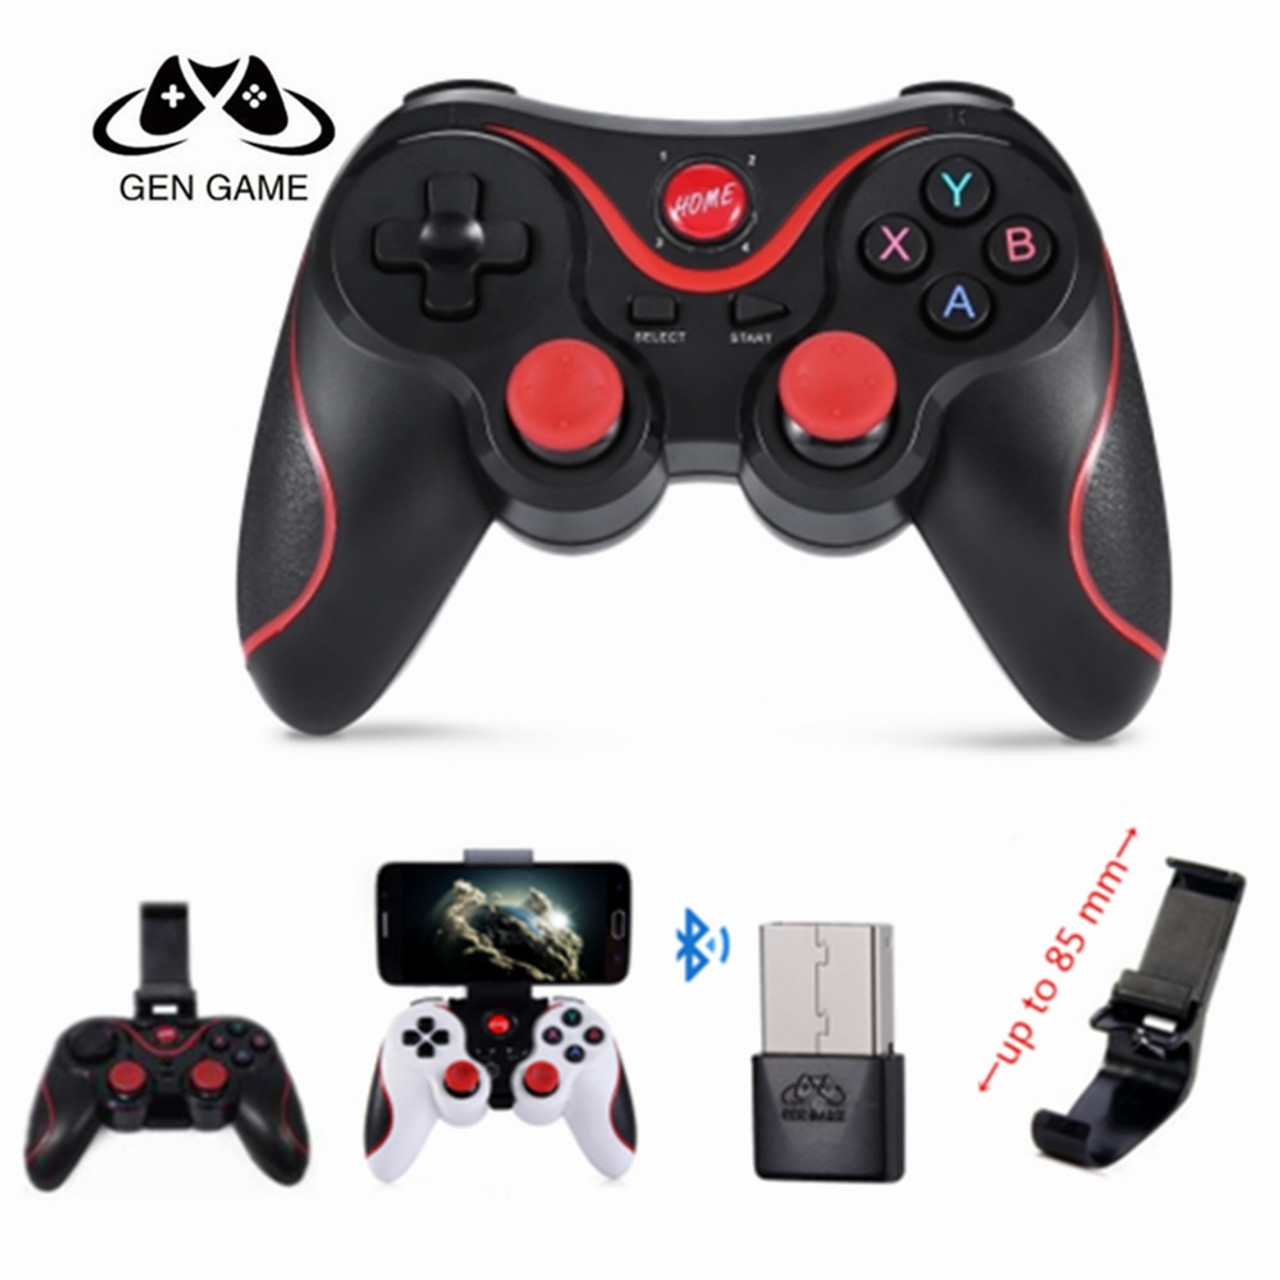 Verbieden Anoniem Gedragen Gen Game X3 Game Controller Smart Wireless Joystick Bluetooth Android  Gamepad Gaming Remote Control T3 Phone for PC Phone Tablet - OnshopDeals.Com